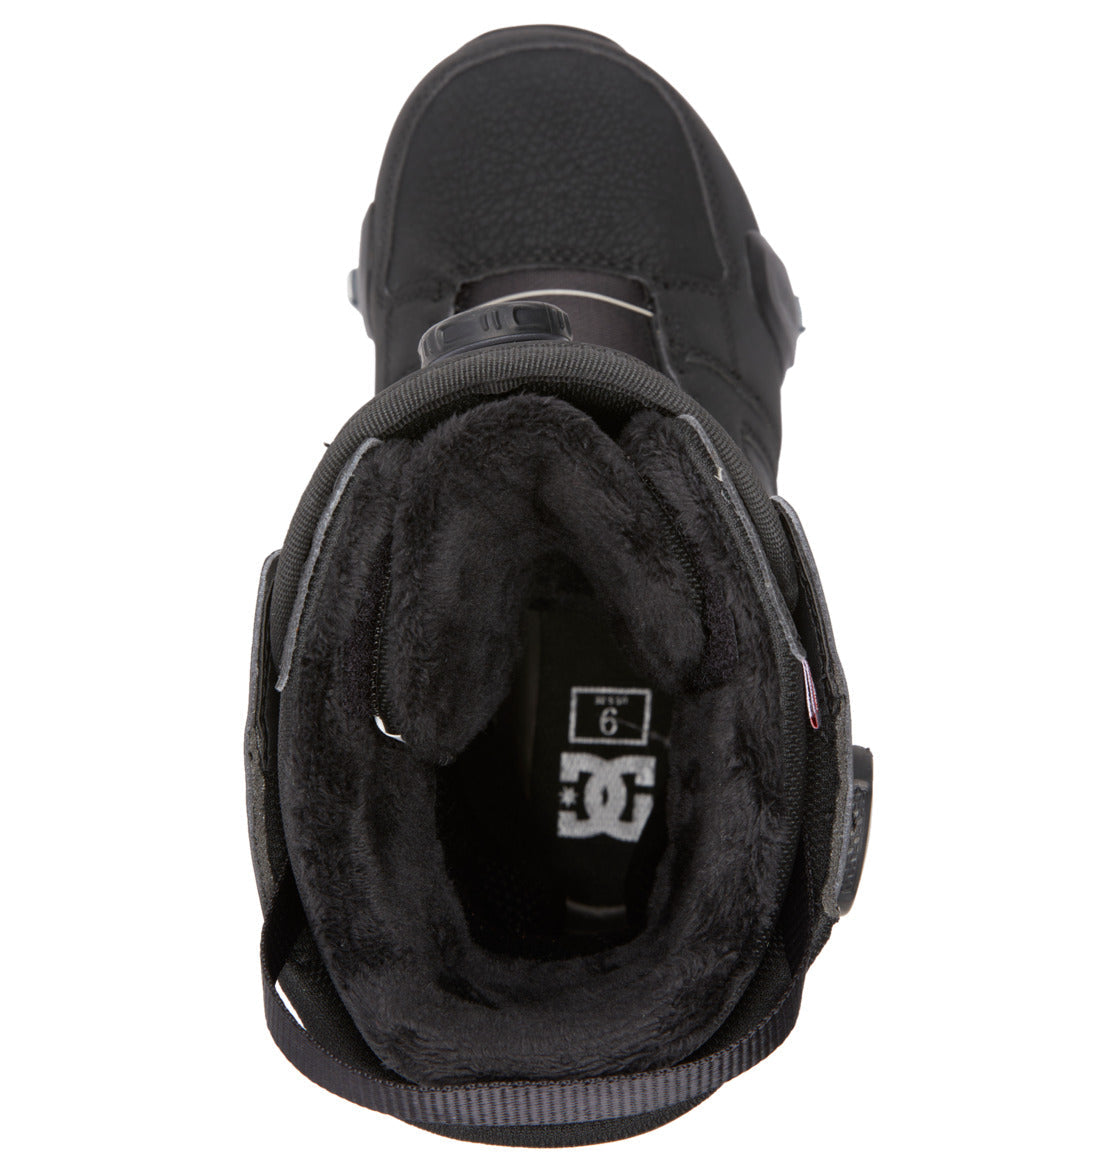 Men's Phase Pro Step On BOA® Snowboard Boots - DC Shoes